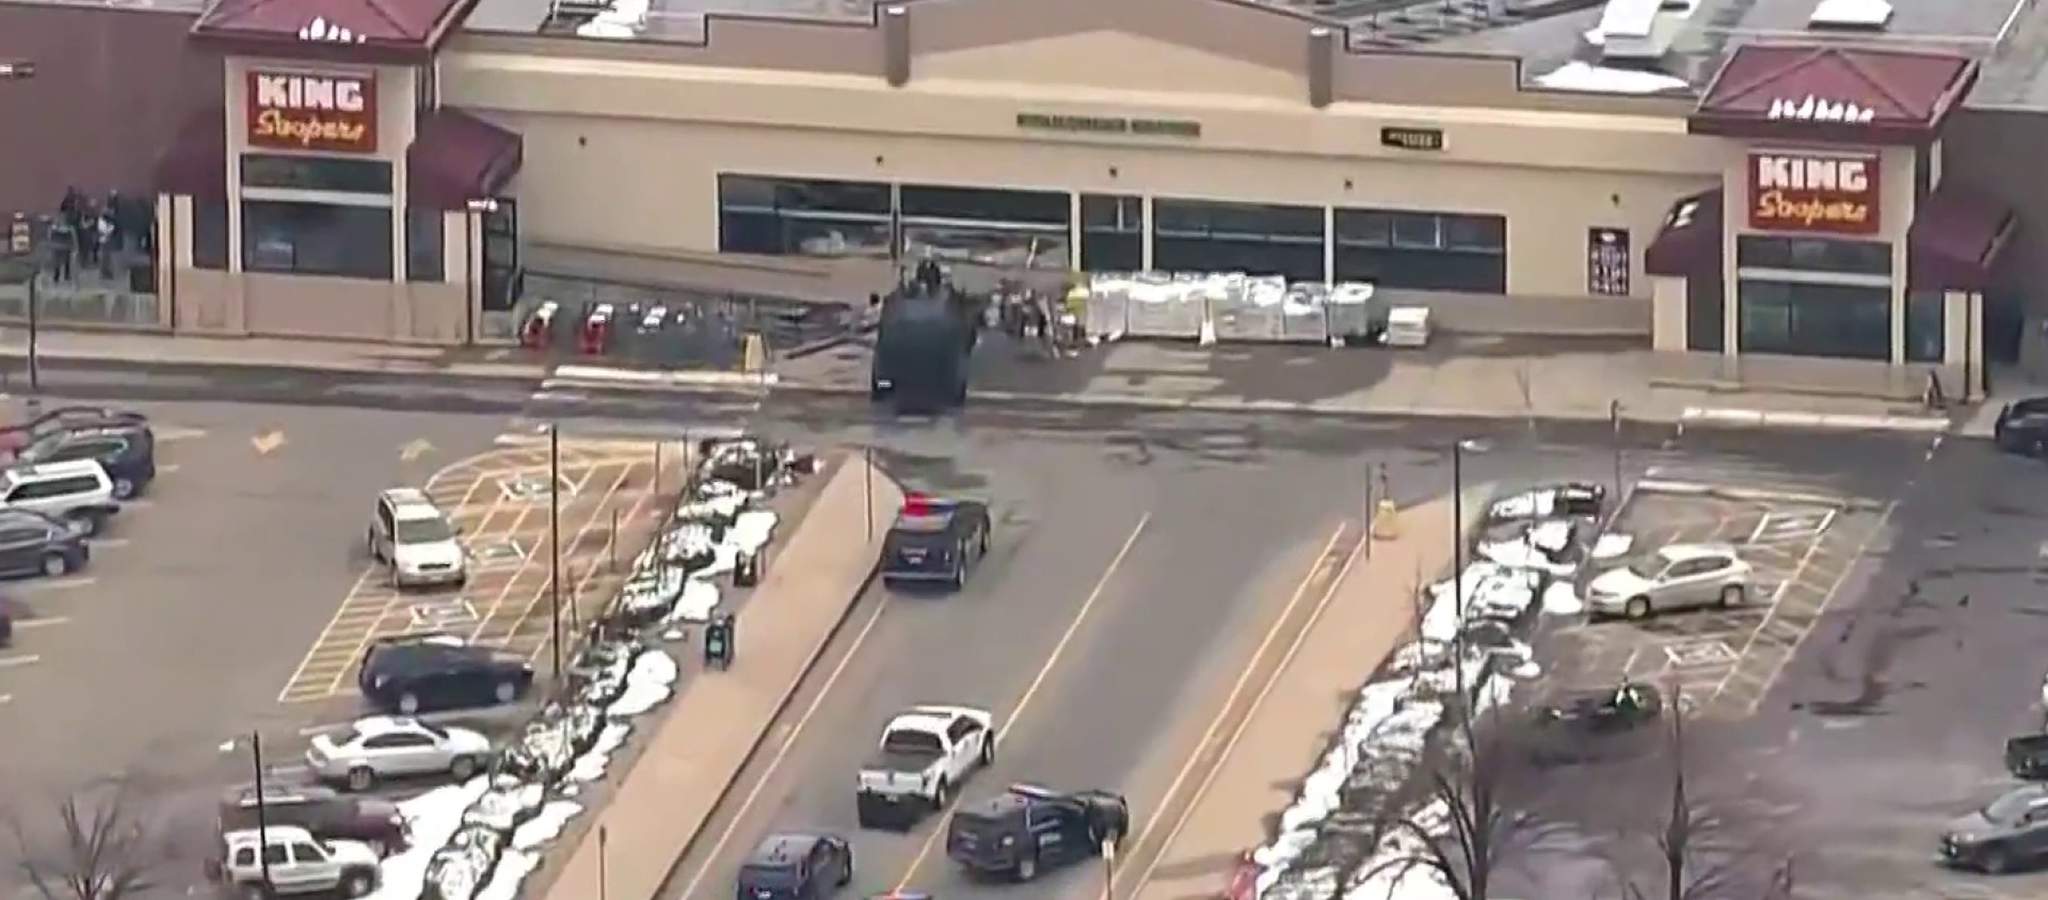 UPDATE: 10 people, including ‘heroic’ officer, killed at Colorado supermarket